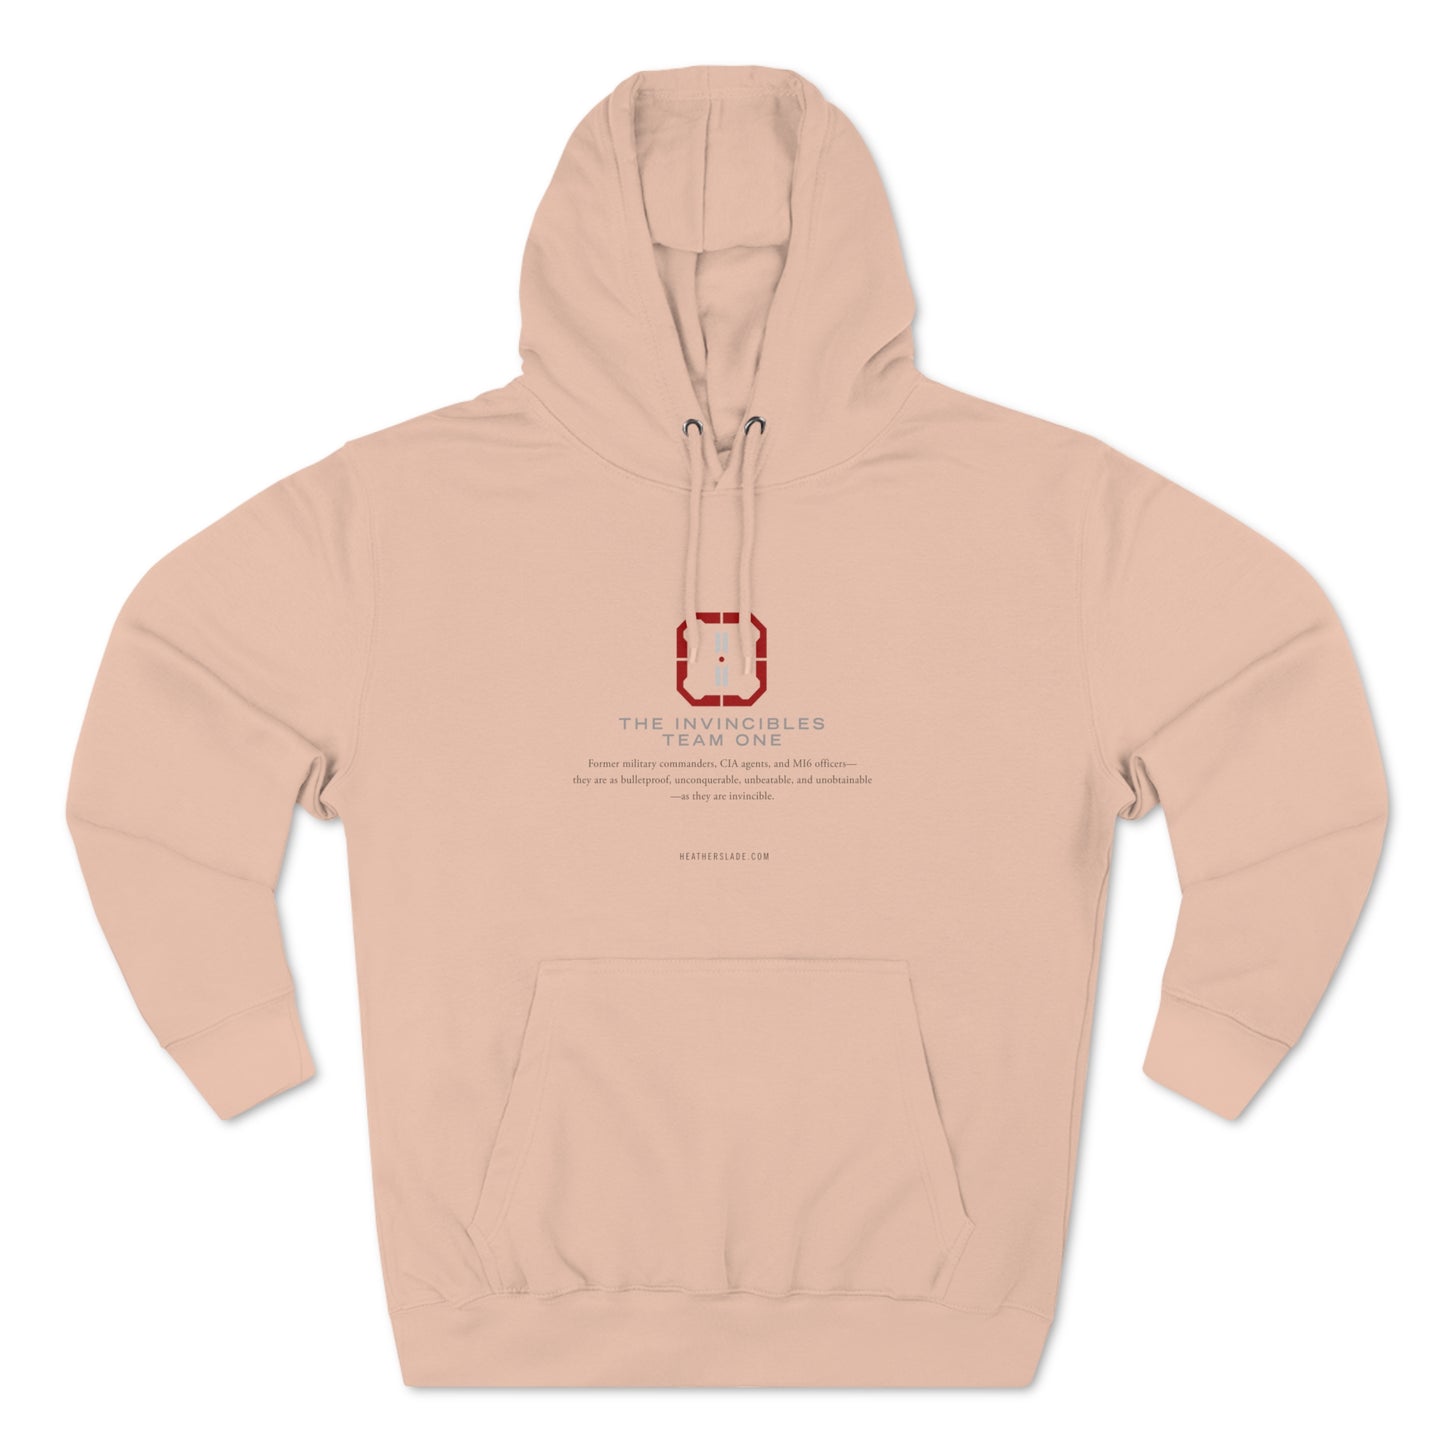 The Invincibles Team One Pullover Hoodie